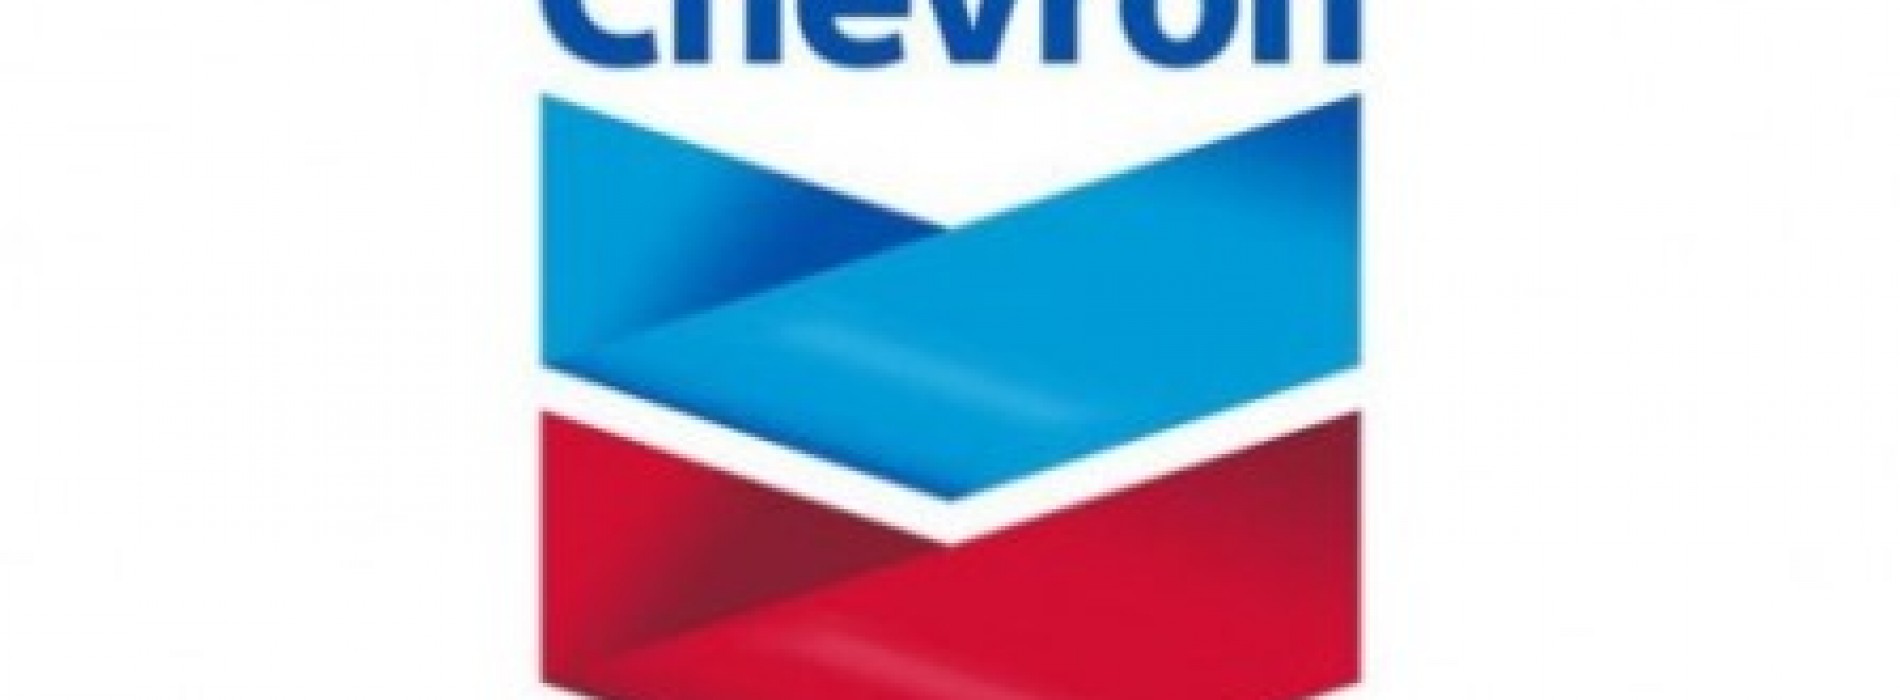 Chevron trains 14 youths to acquire high level oil, gas industry skills